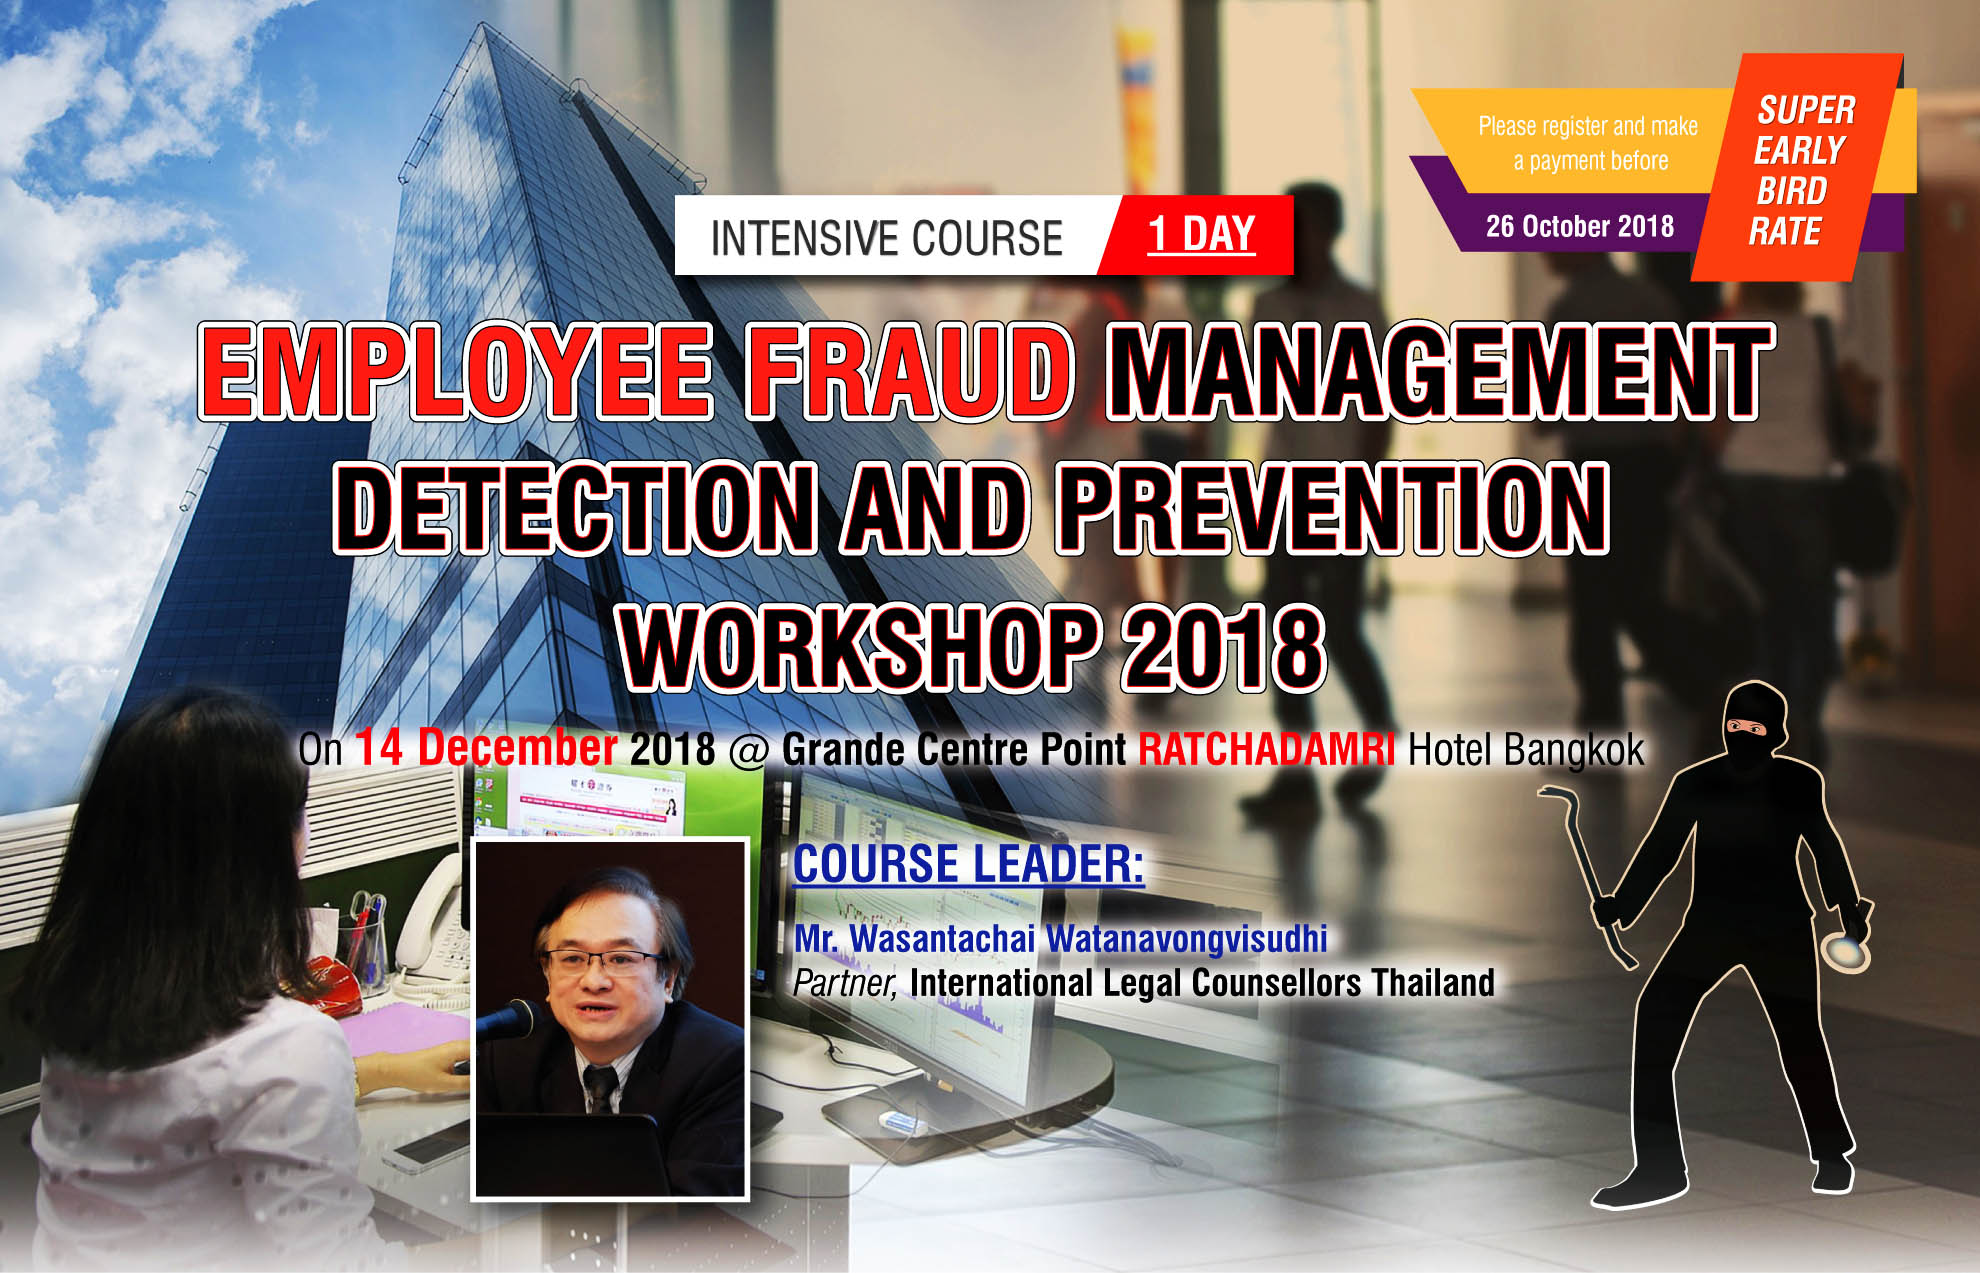 Employee Fraud Management, Detection and Prevention Workshop 2018